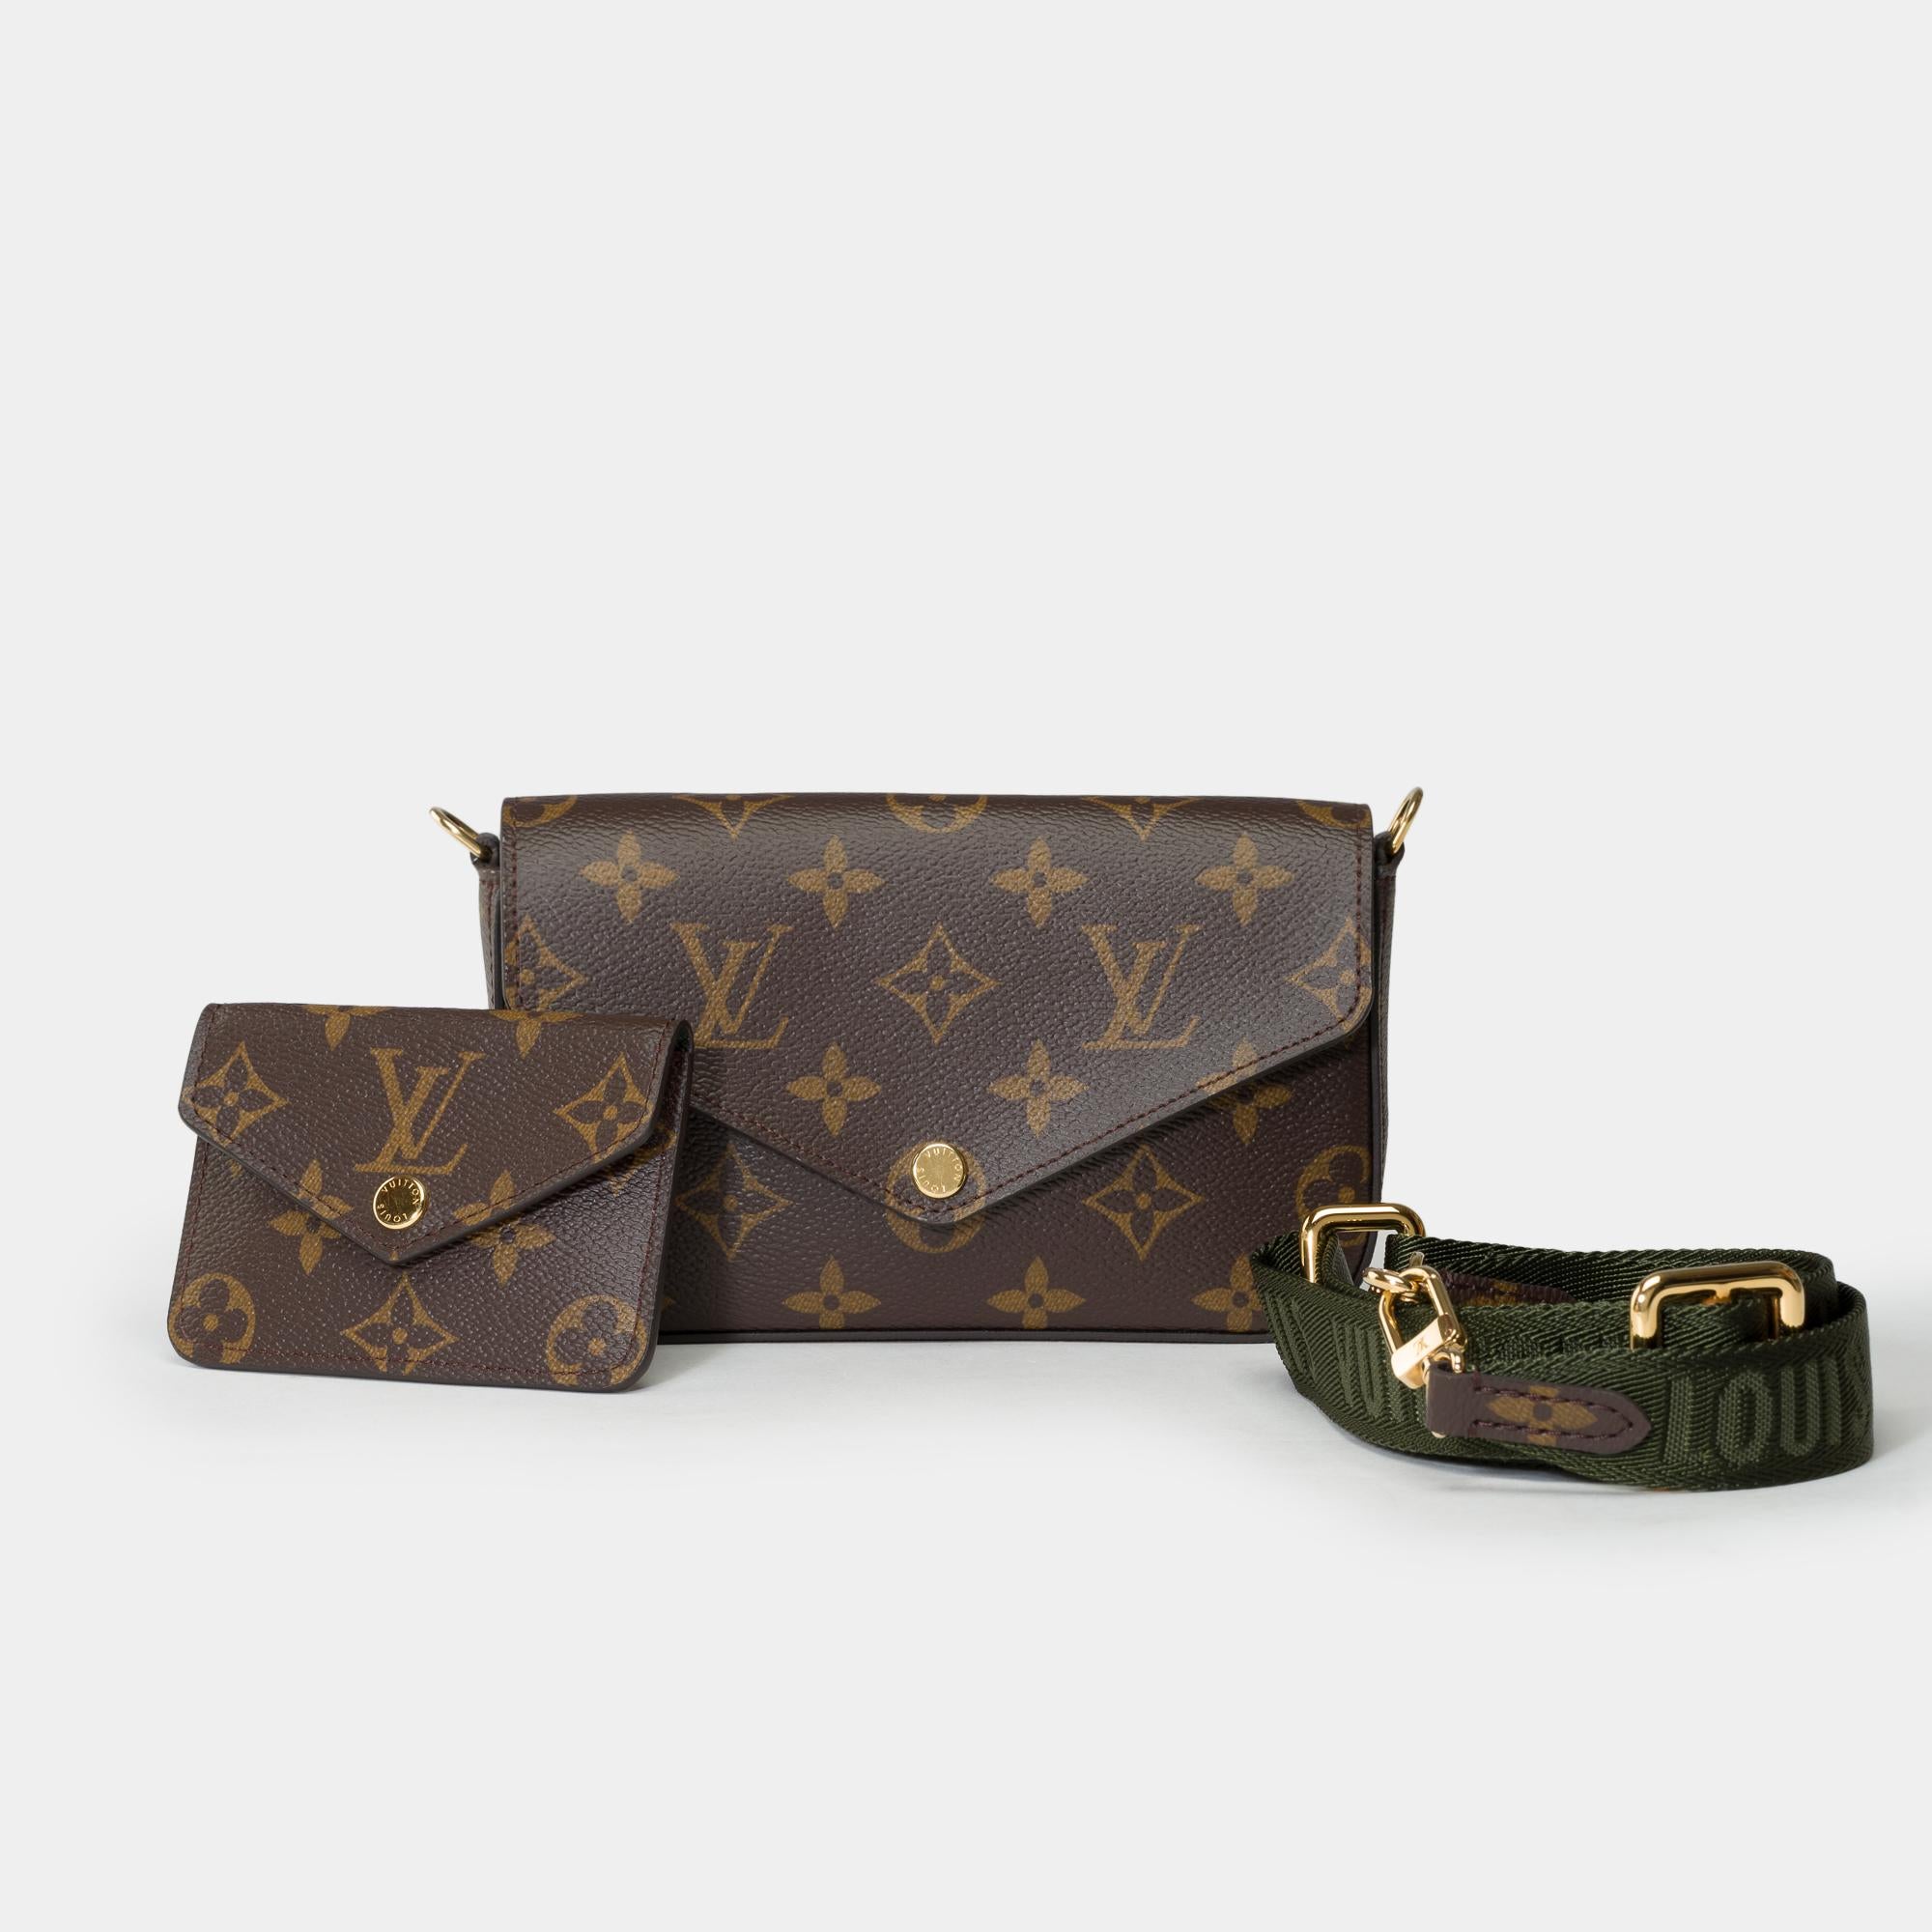 Inspired​ ​by​ ​the​ ​versatile​ ​Félicie​ ​Pochette,​ ​the​ ​Félicie​ ​Strap​ ​&​ ​Go​ ​in​ ​iconic​ ​Monogram​ ​canvas​ ​offers​ ​even​ ​more​ ​options.​ ​The​ ​main​ ​pouch​ ​holds​ ​everyday​ ​essentials,​ ​including​ ​a​ ​smartphone,​ ​while​